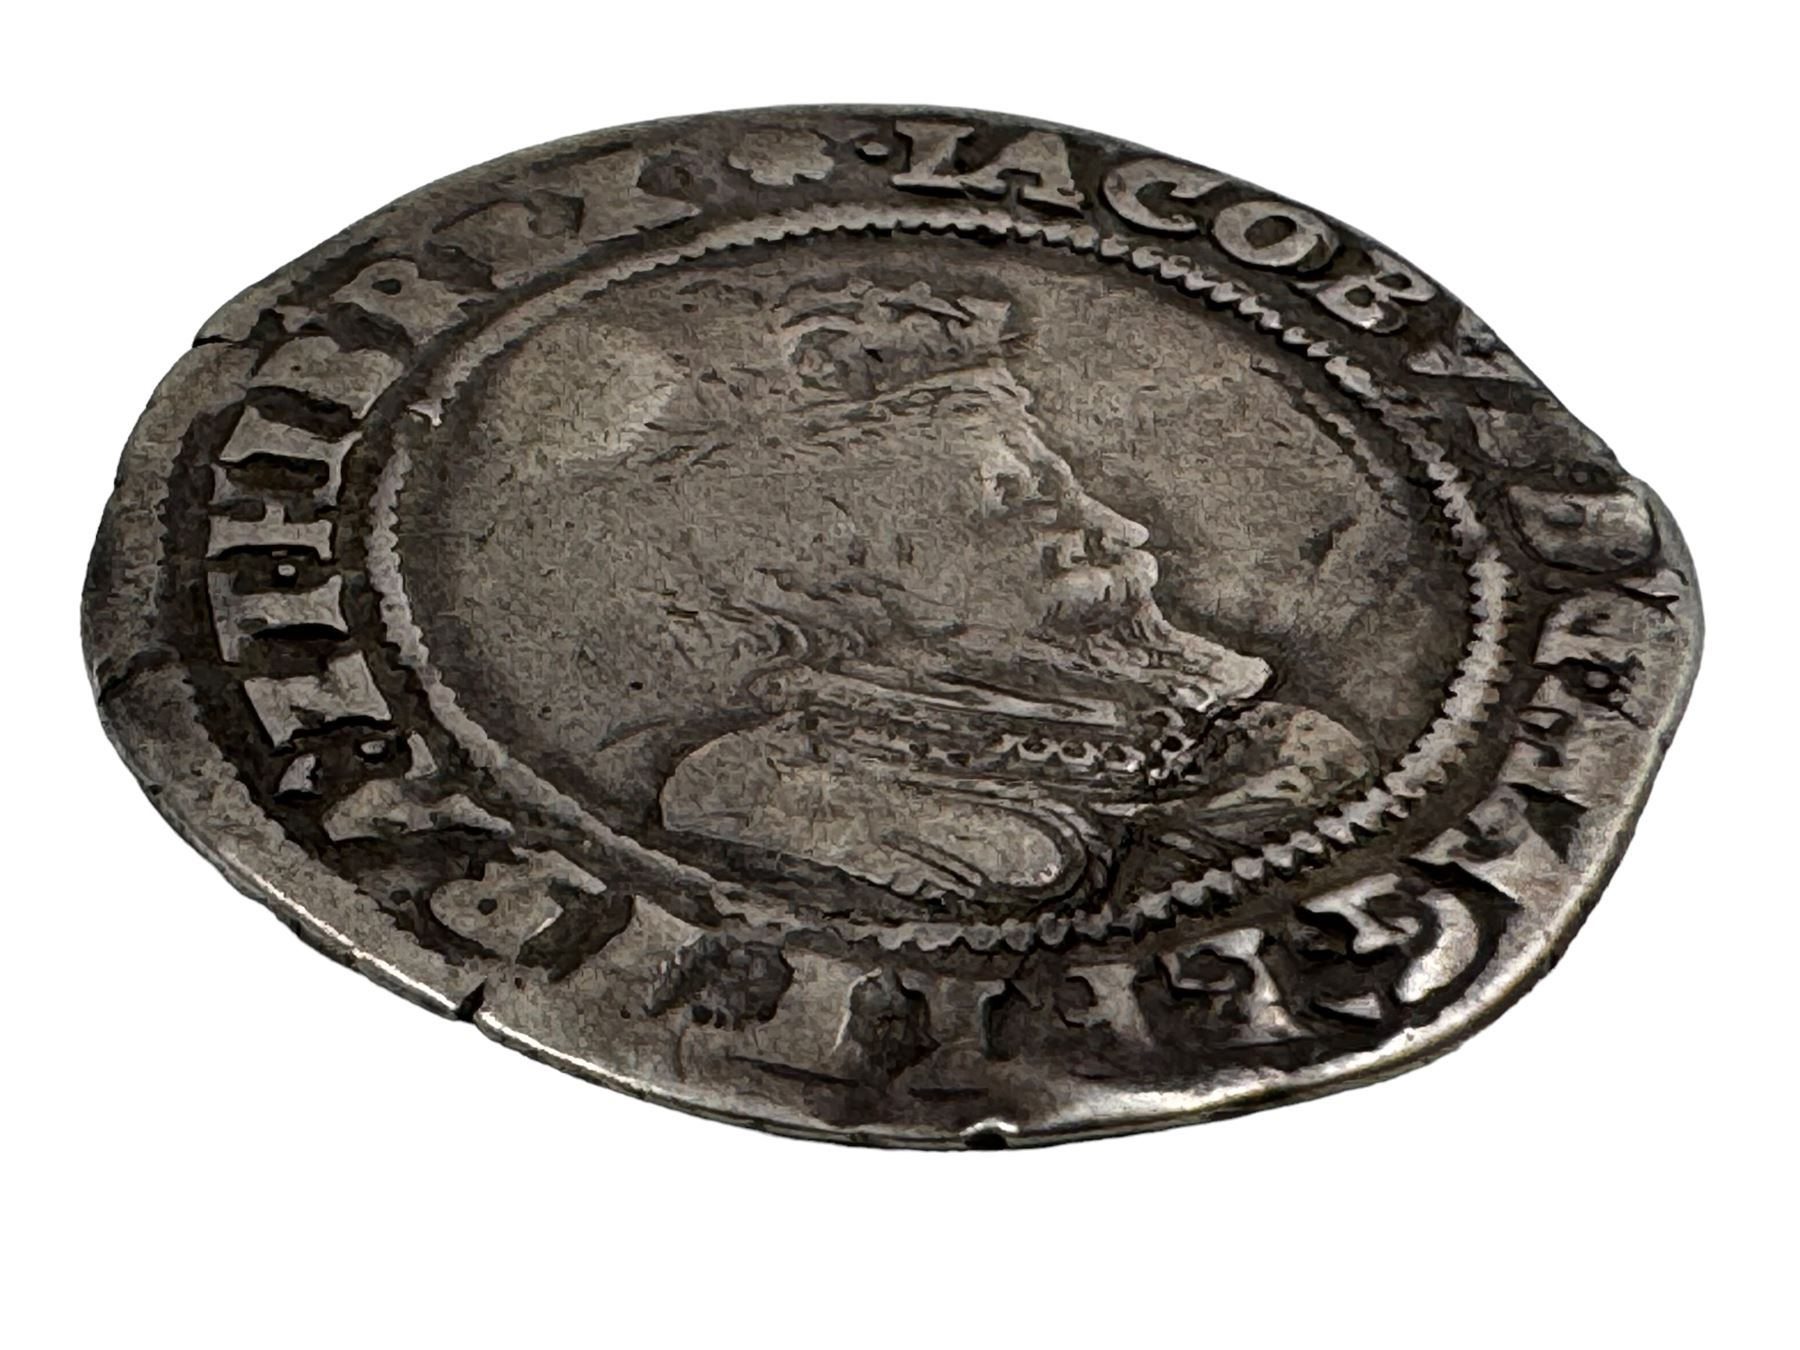 James I Irish 17th century silver one shilling coin - Image 3 of 11